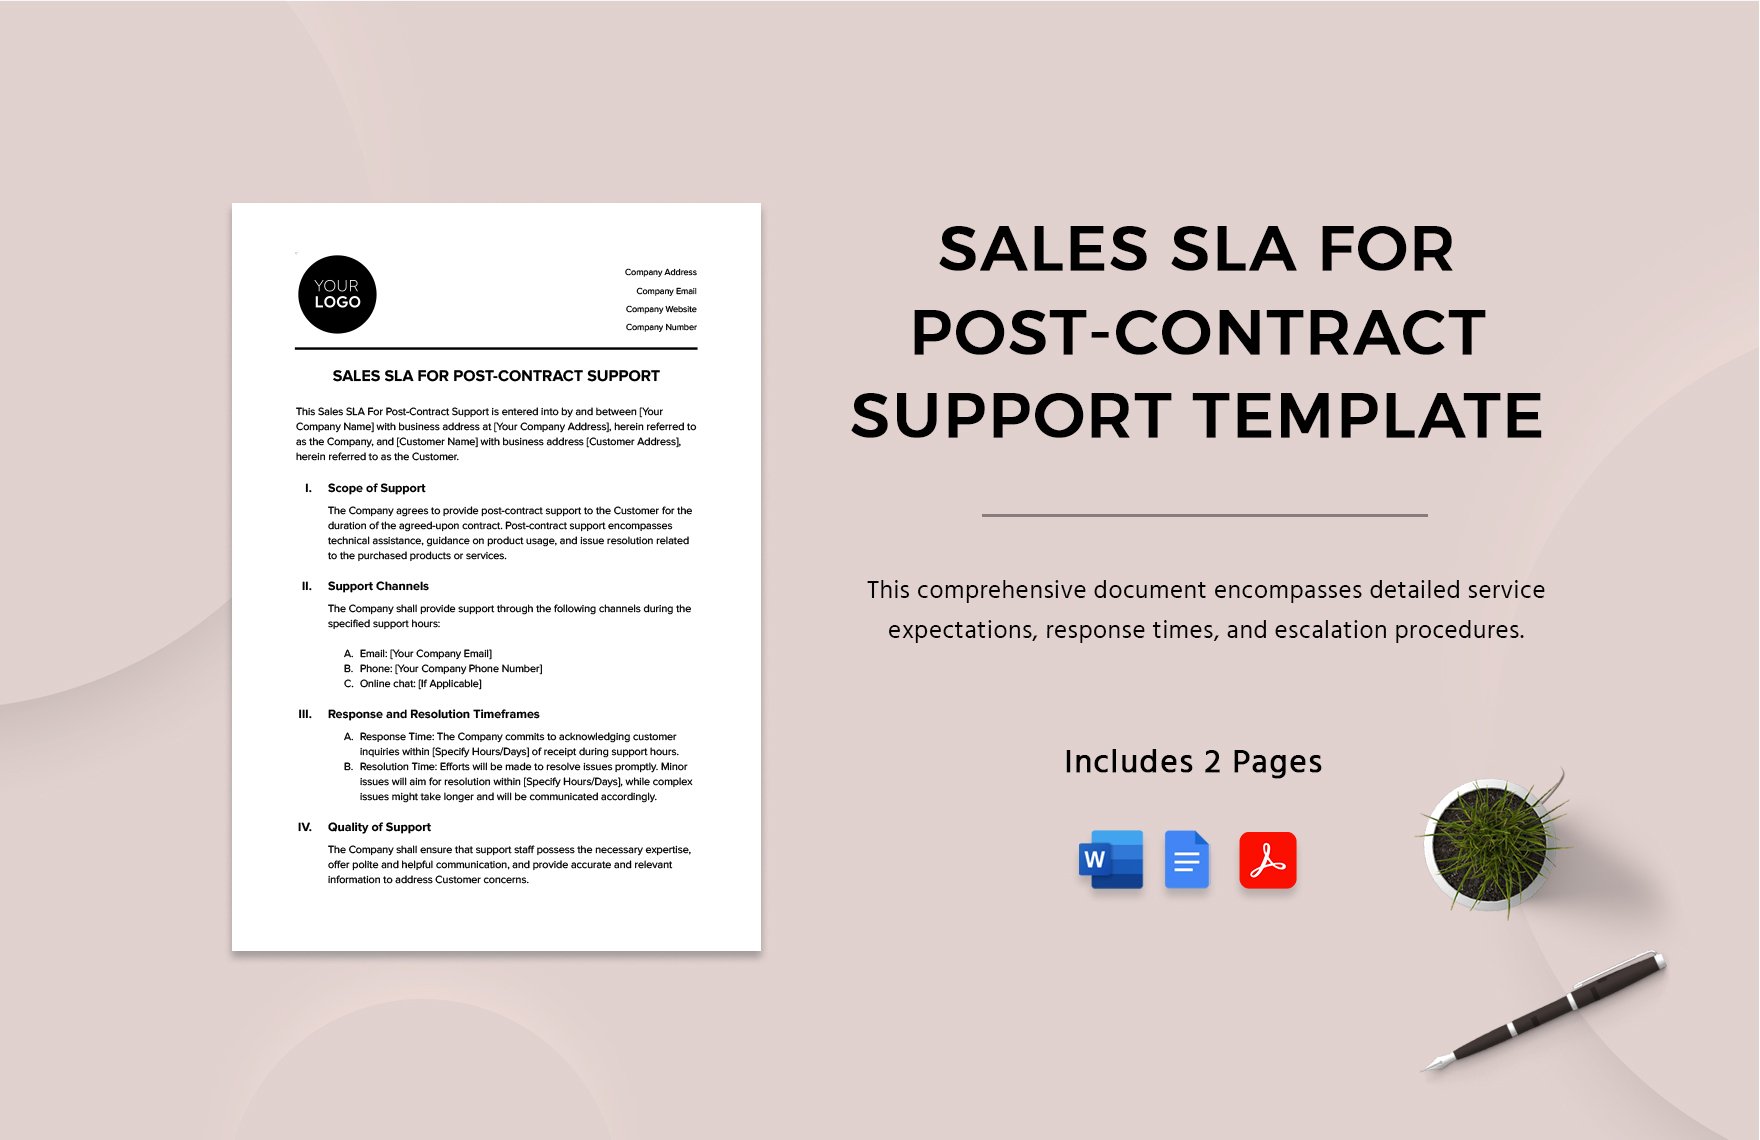 Sales SLA for Post-Contract Support Template